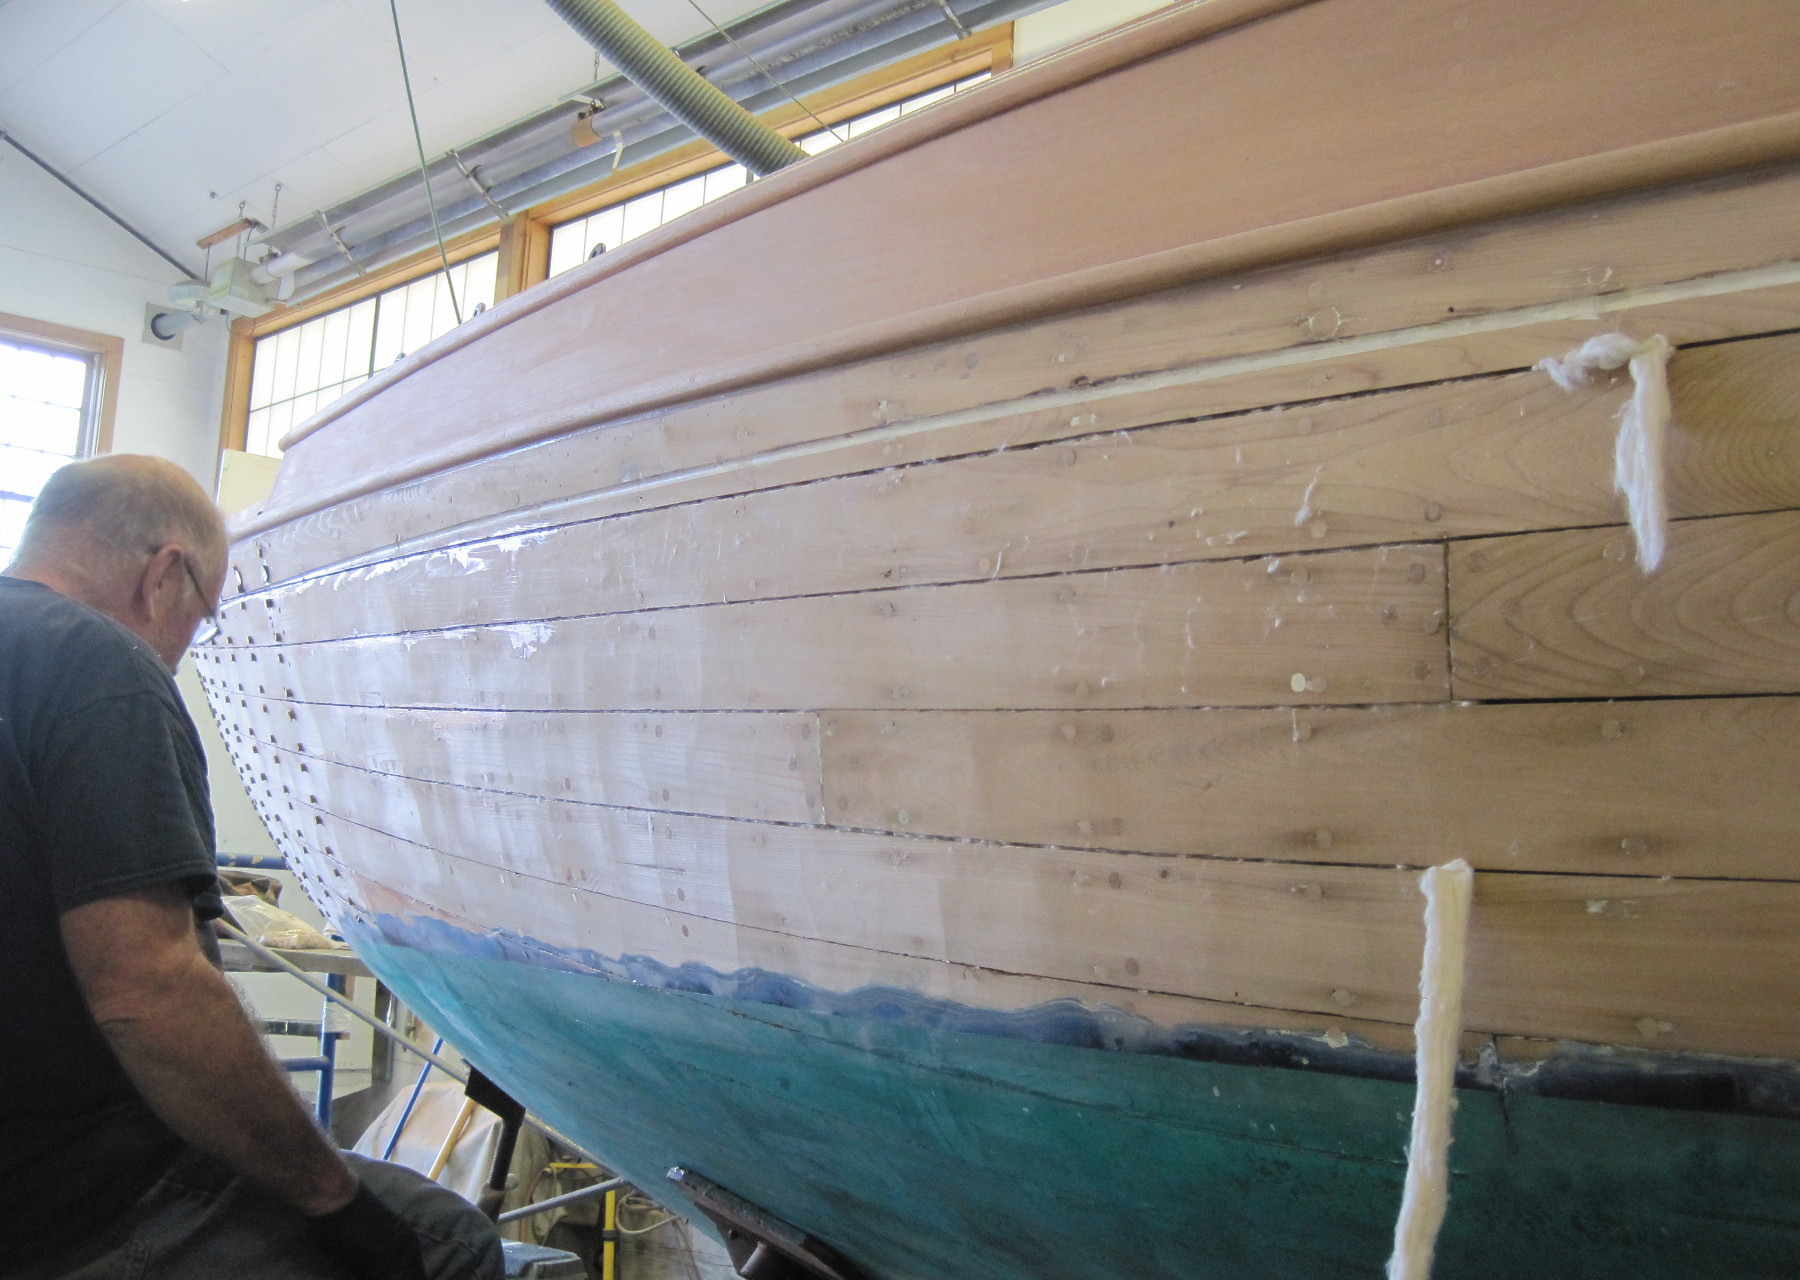 Wooden Boat Restoration - Kestrel - The hull planks being refastened and bunged.